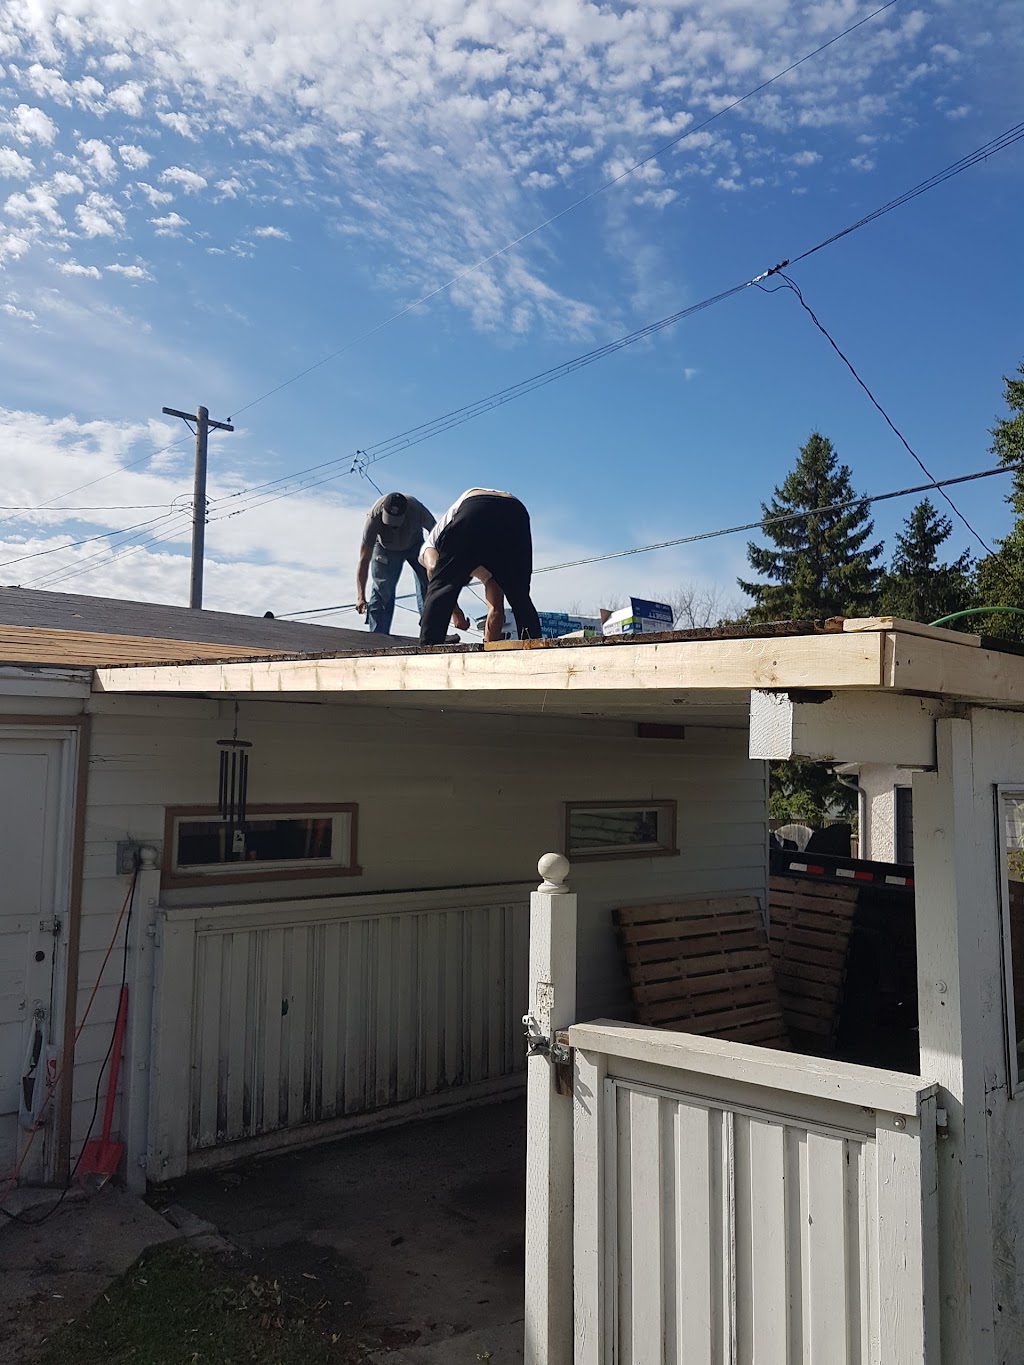 Dachdecker Roofing | roofing contractor | 73 Siddall Crescent, Winnipeg, MB R2K 3W5, Canada | 2045098426 OR +1 204-509-8426